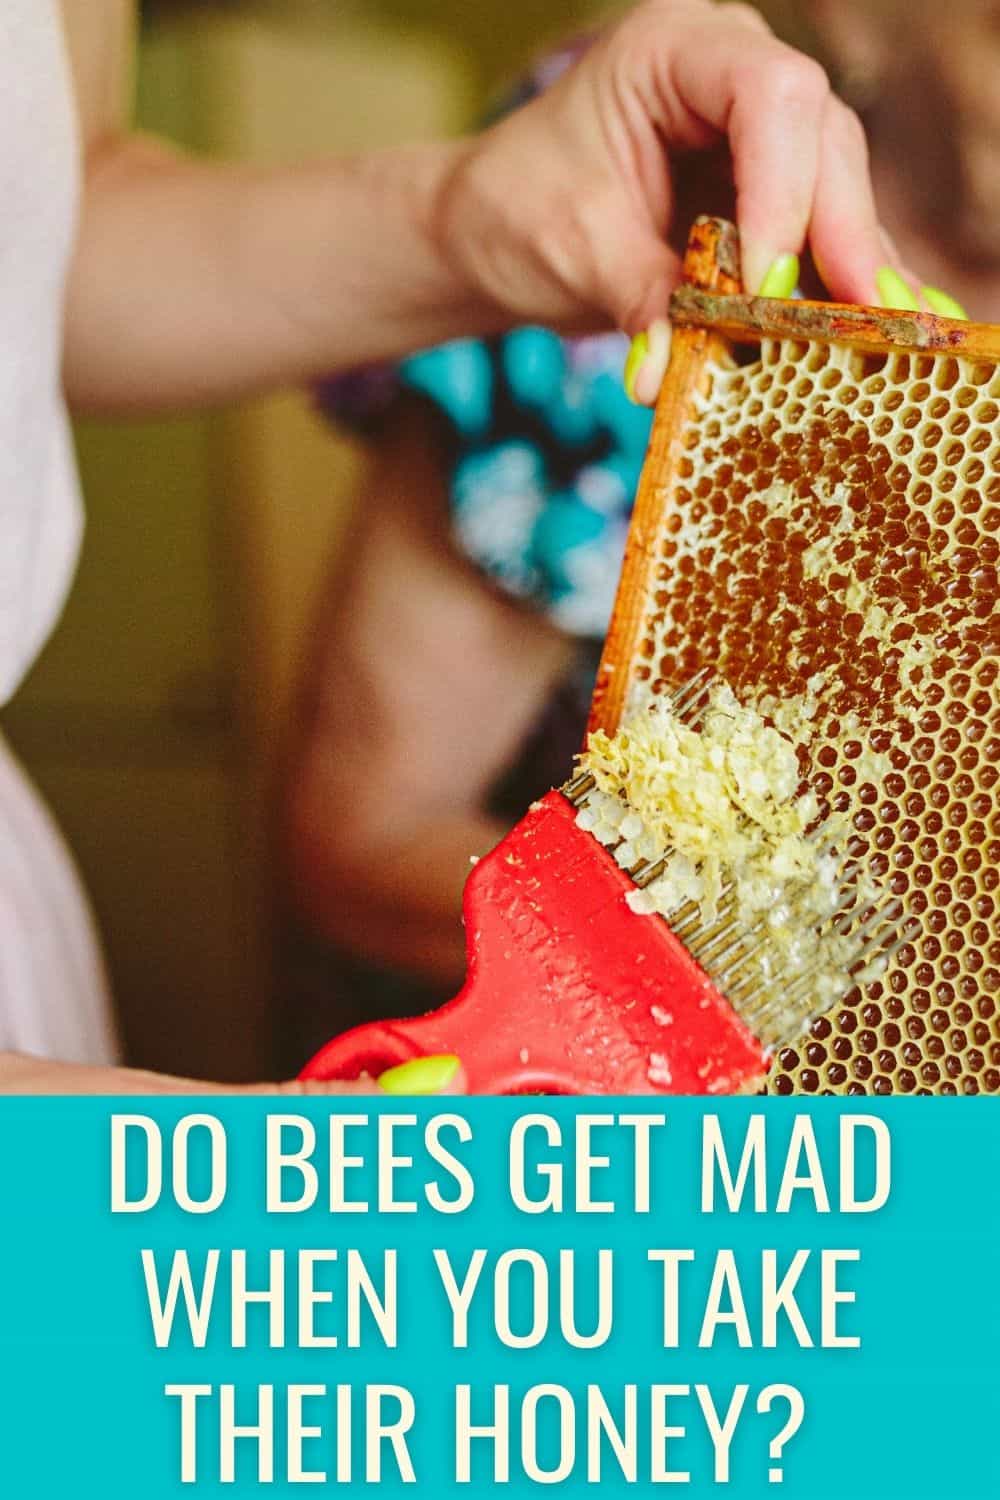 Do bees get mad when you take their honey